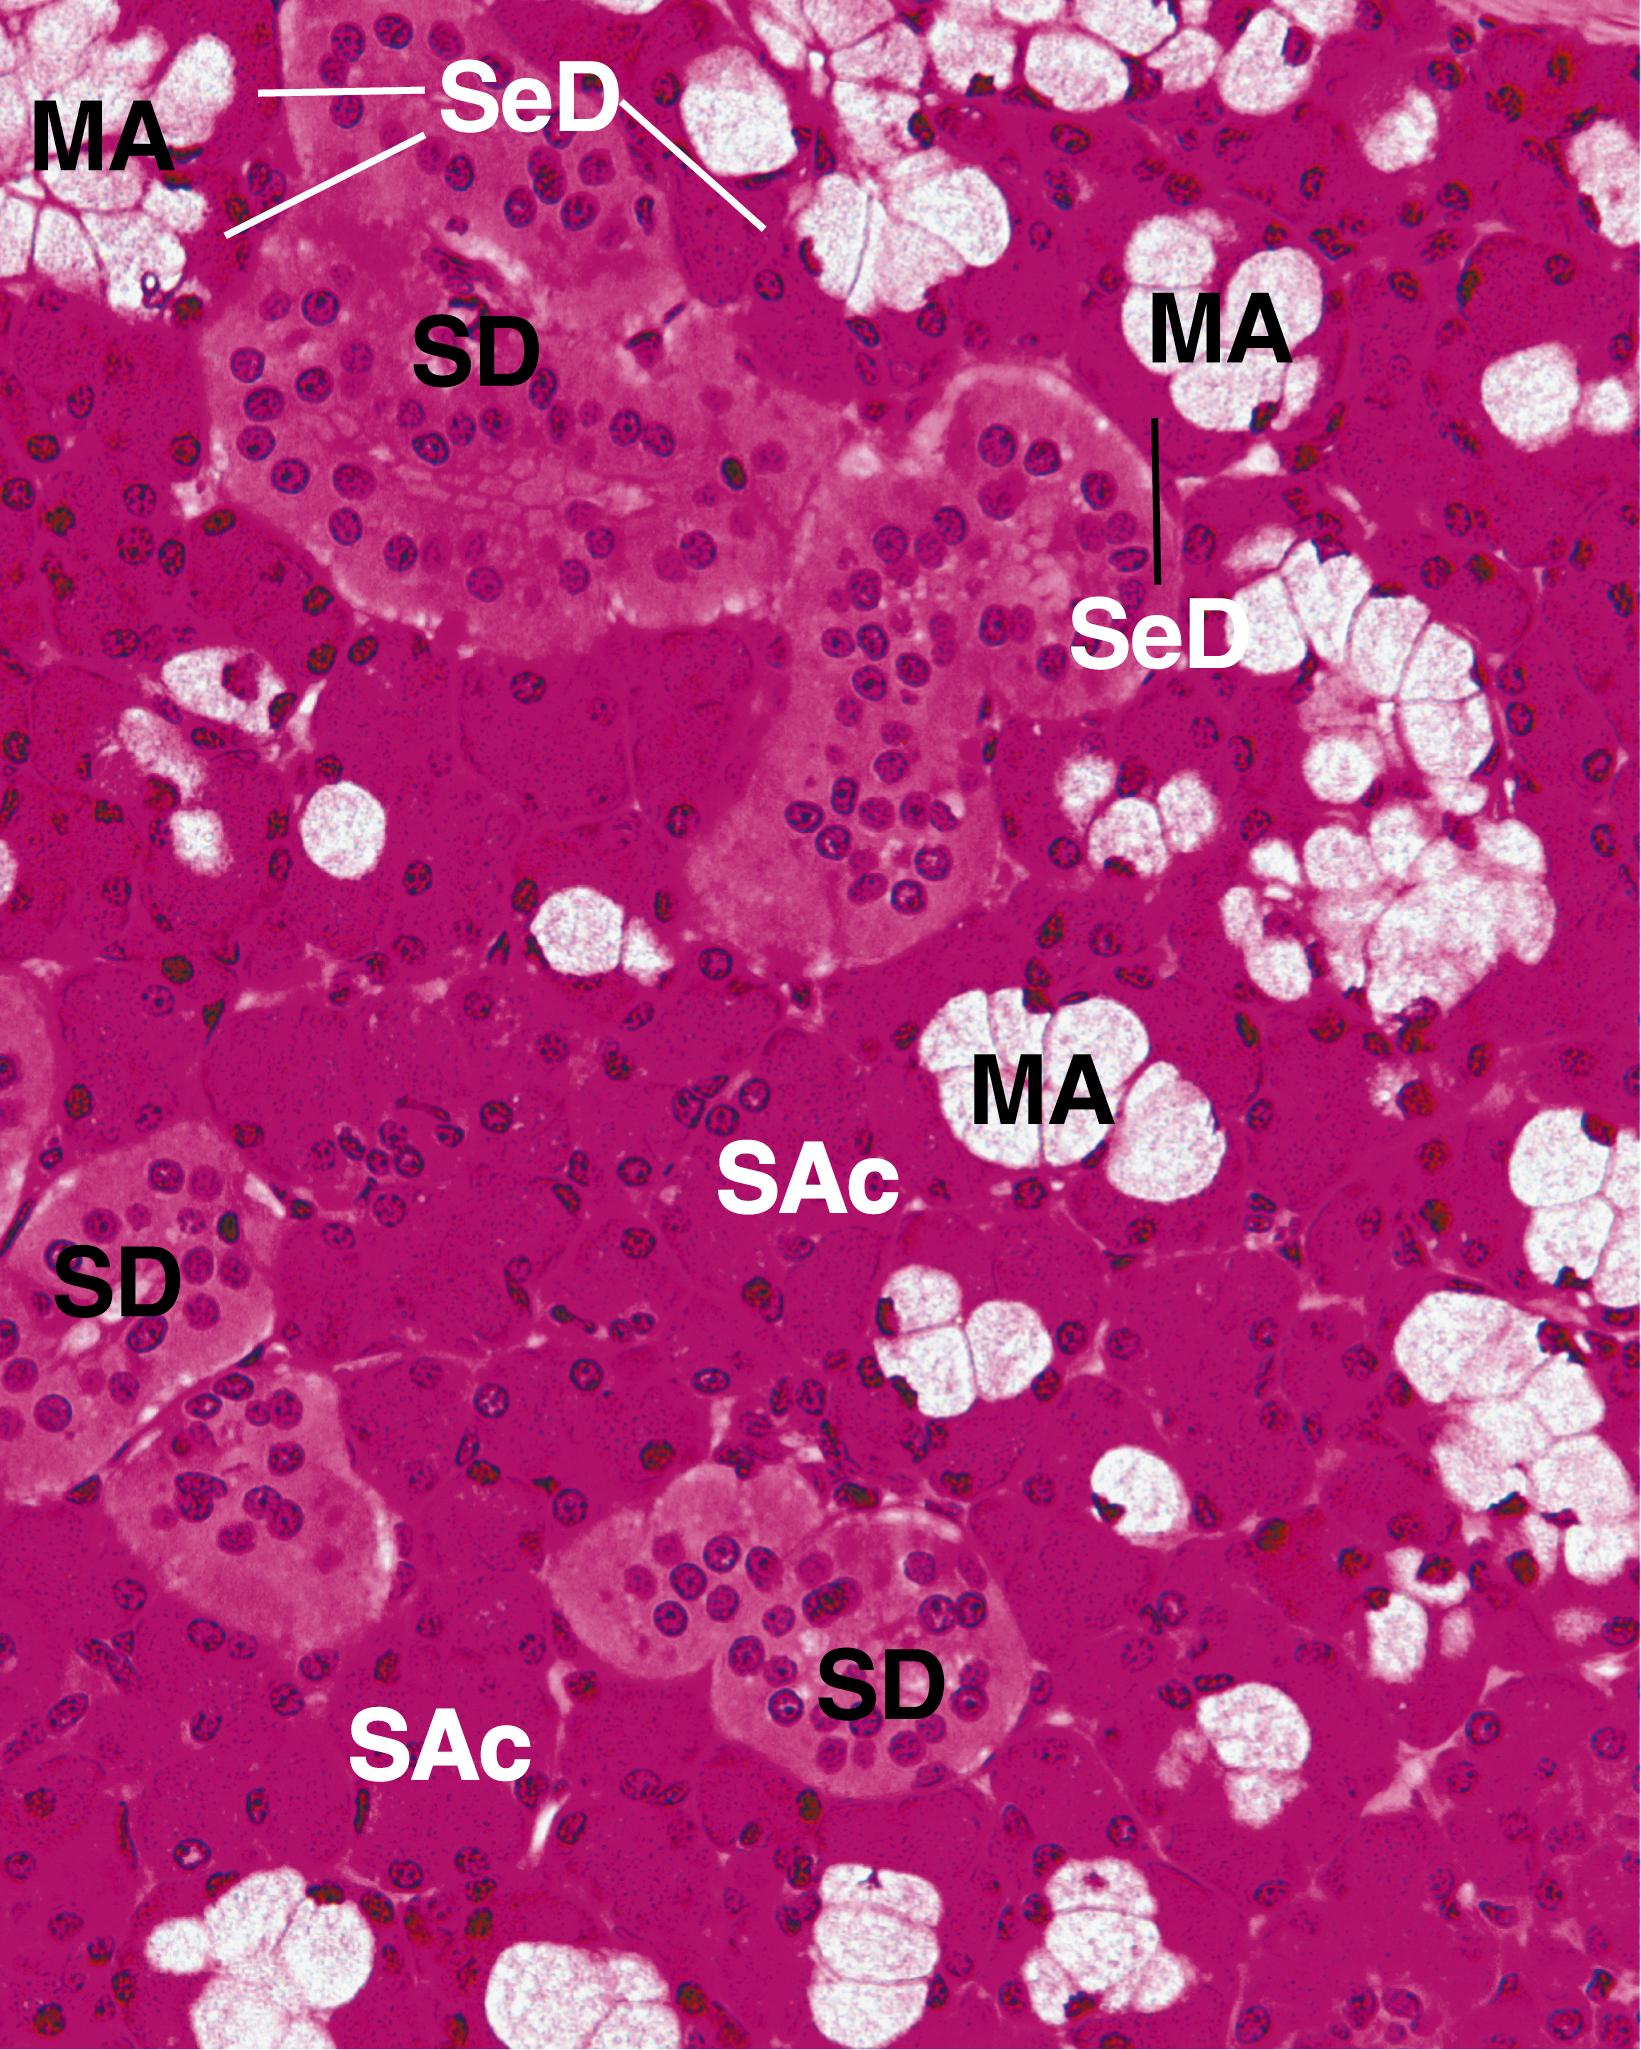 Fig. 18.9, The submandibular gland produces mainly serous saliva. Accordingly, most of its acini are serous (SAc) with some mucous tubules (MA) capped with serous demilunes (SeD). One of the most characteristic features of the submandibular gland is the presence of a large number of striated duct (SD) profiles. (×270)